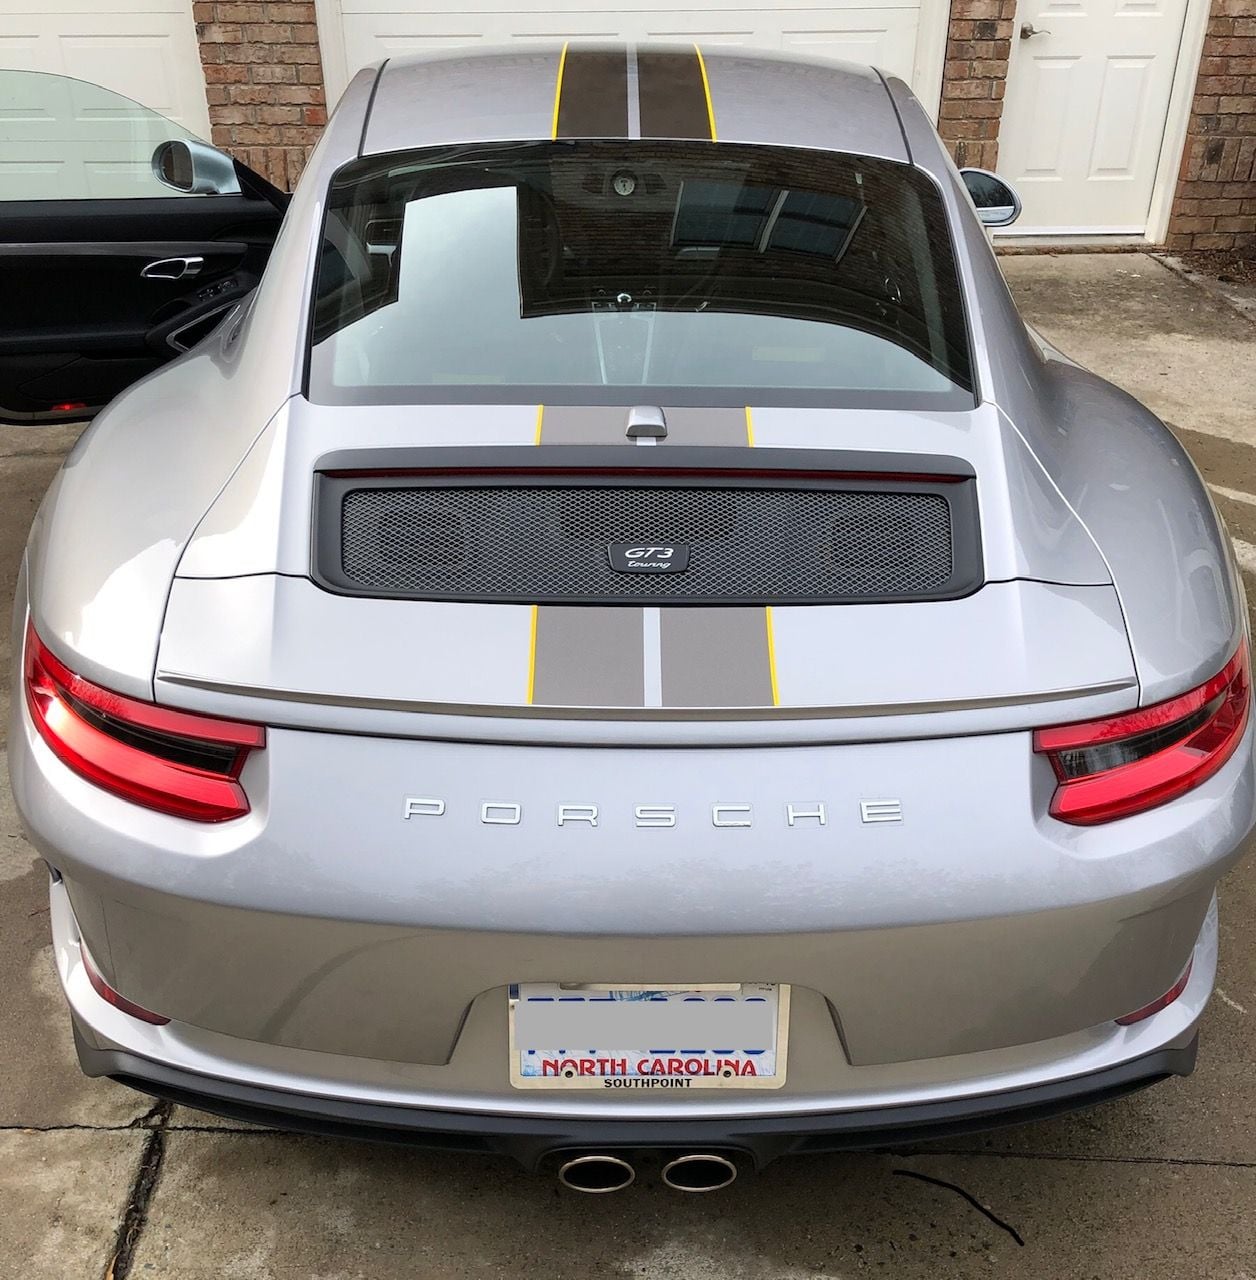 2018 Porsche GT3 - 2018 GT3 Touring - GT Silver -CPO - Used - VIN WP0AC2A95JS175547 - 1,940 Miles - Raleigh, NC 27609, United States